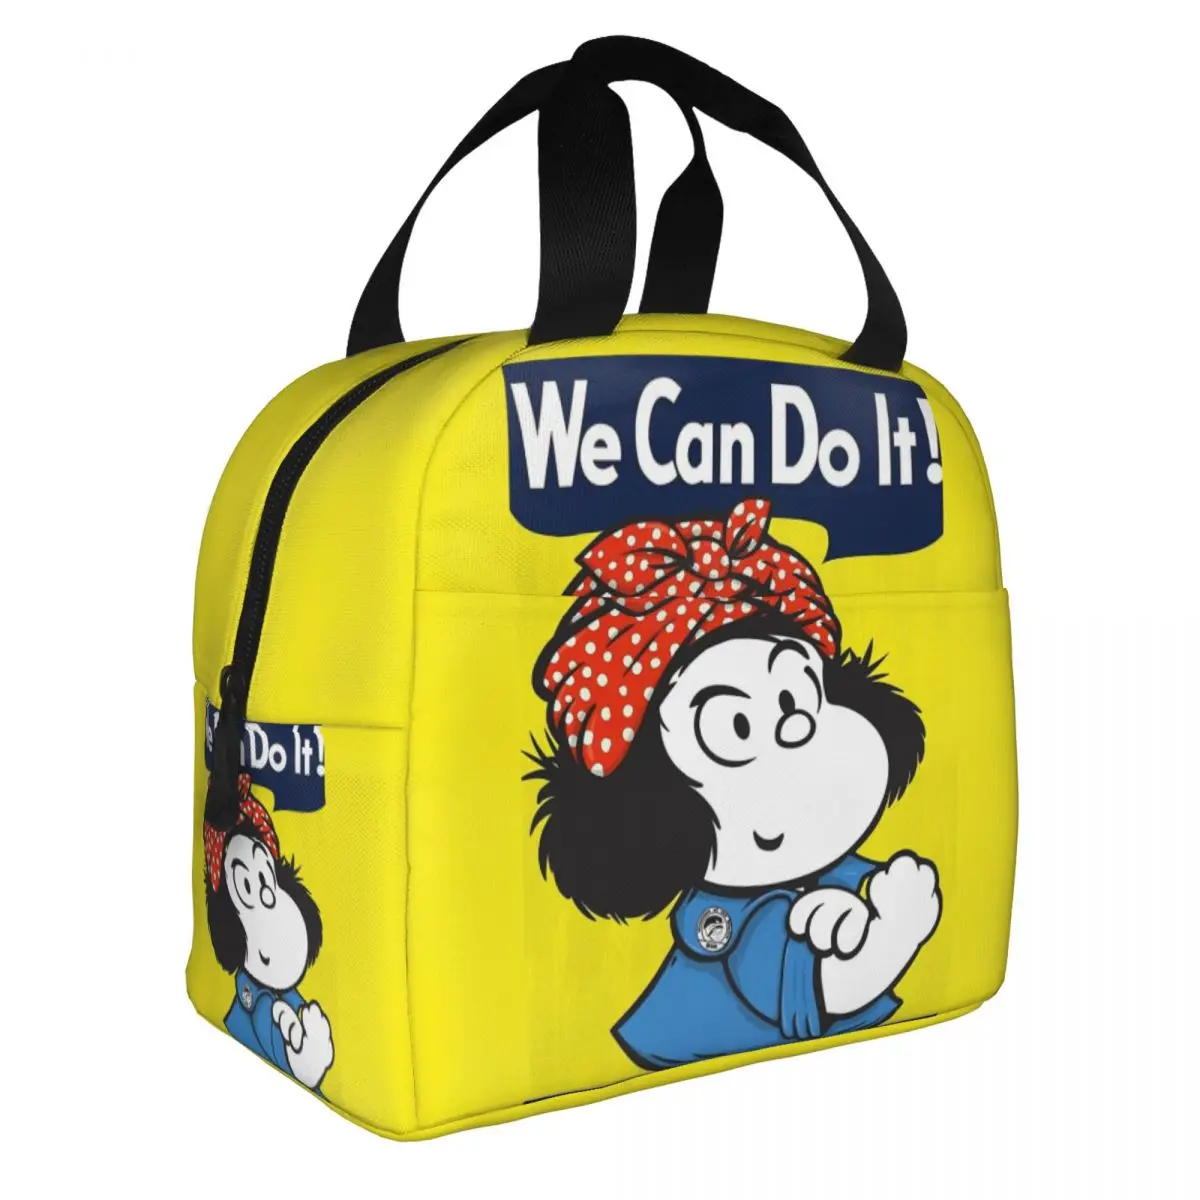 

Mafalda We Can Do It Poster Insulated Lunch Bag Large Meal Container Cooler Bag Tote Lunch Box Beach Picnic Men Women